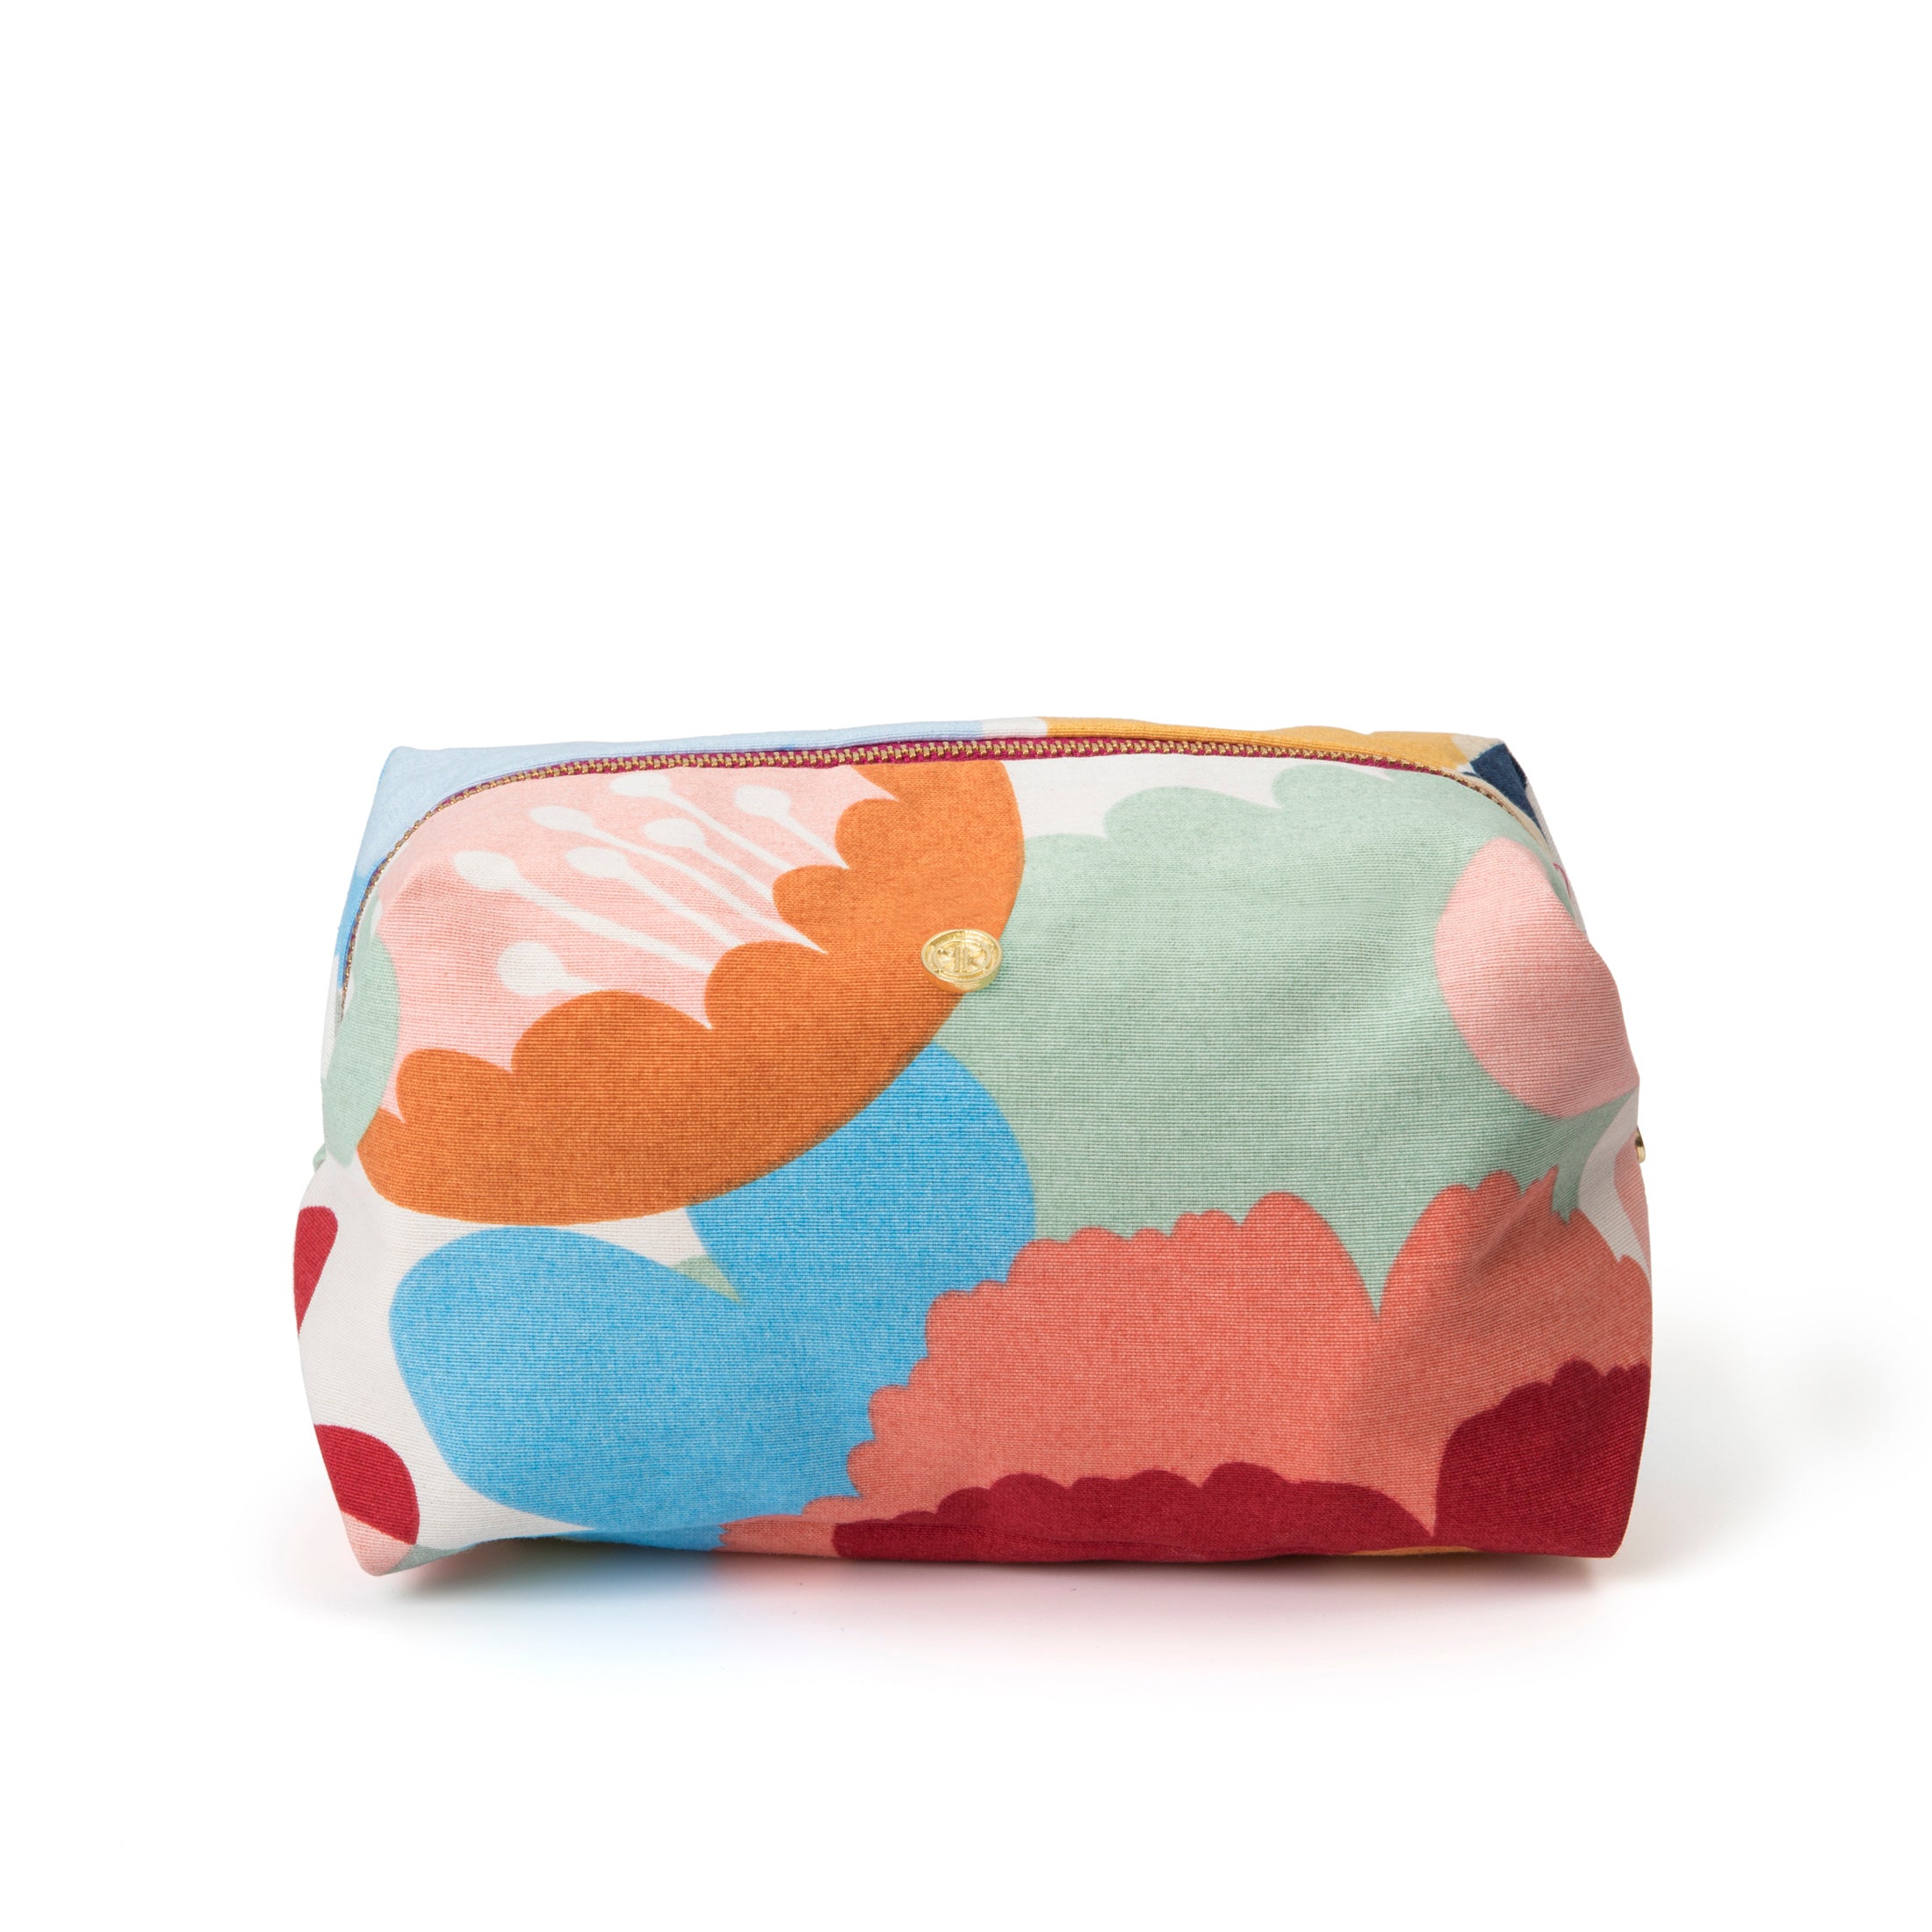 Floral and Striped Toiletry / Cosmetic Bags